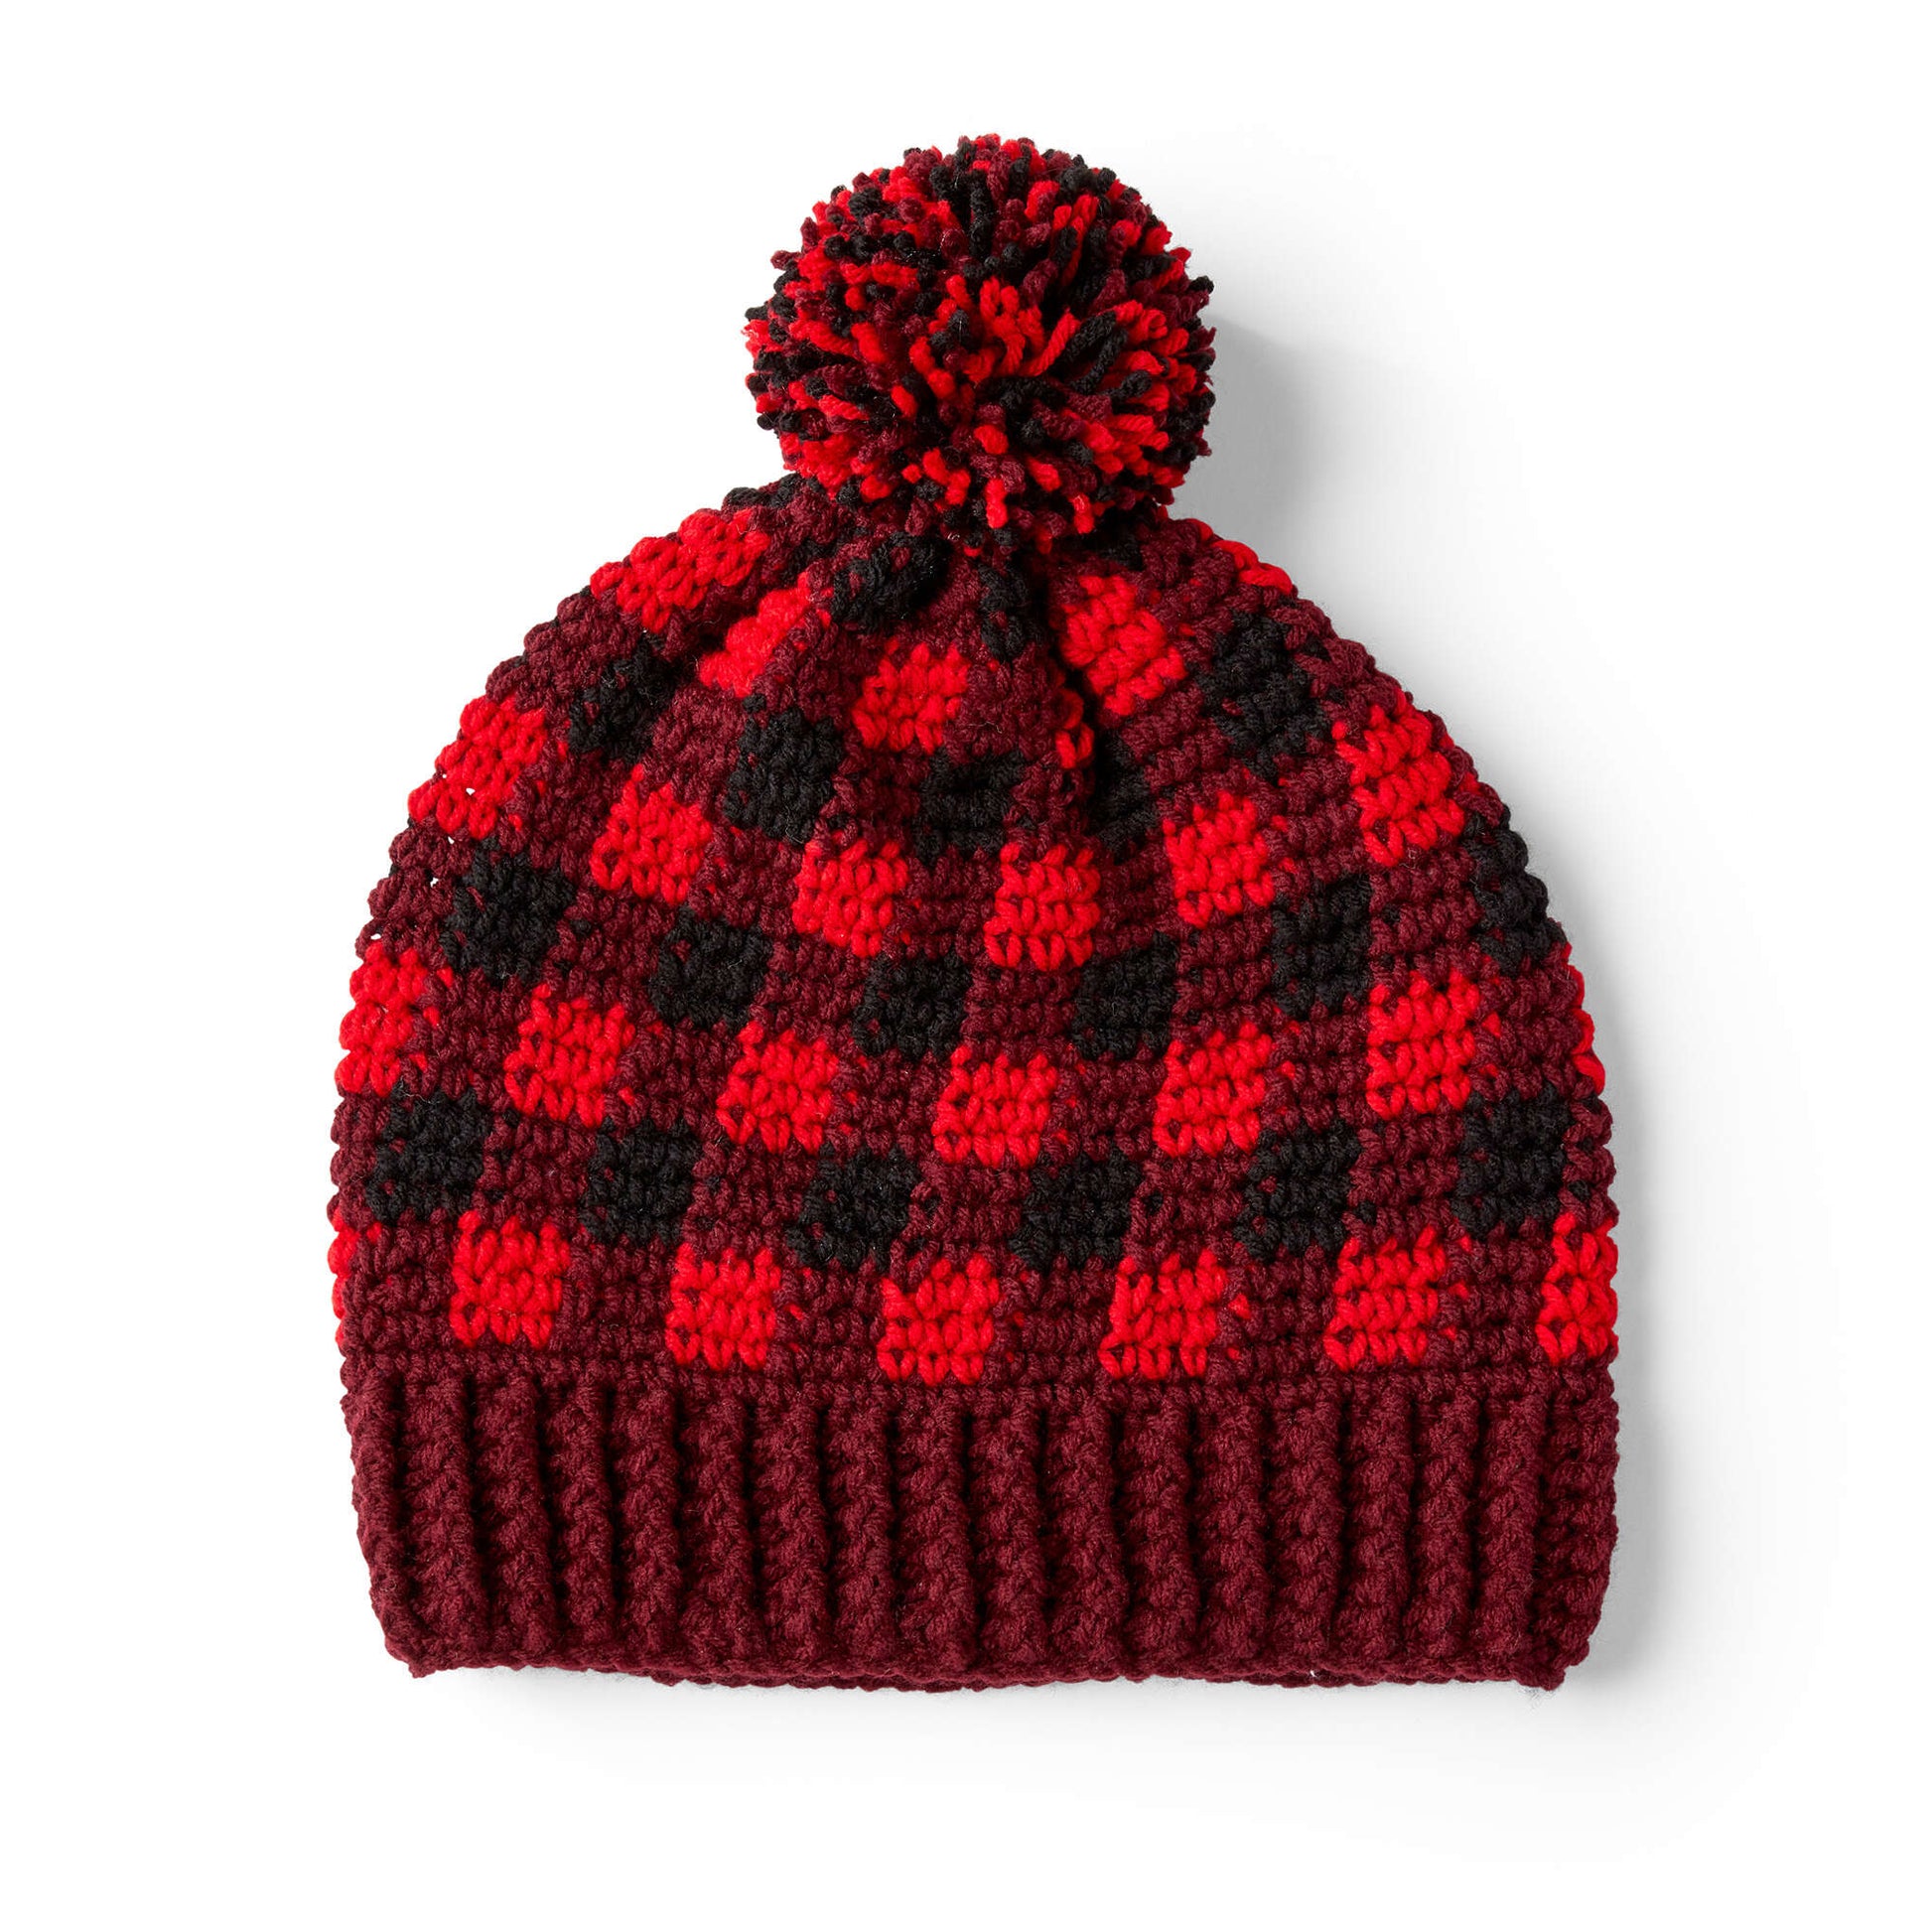 Red Heart Buffalo Plaid Crochet Hat For Him Single Size